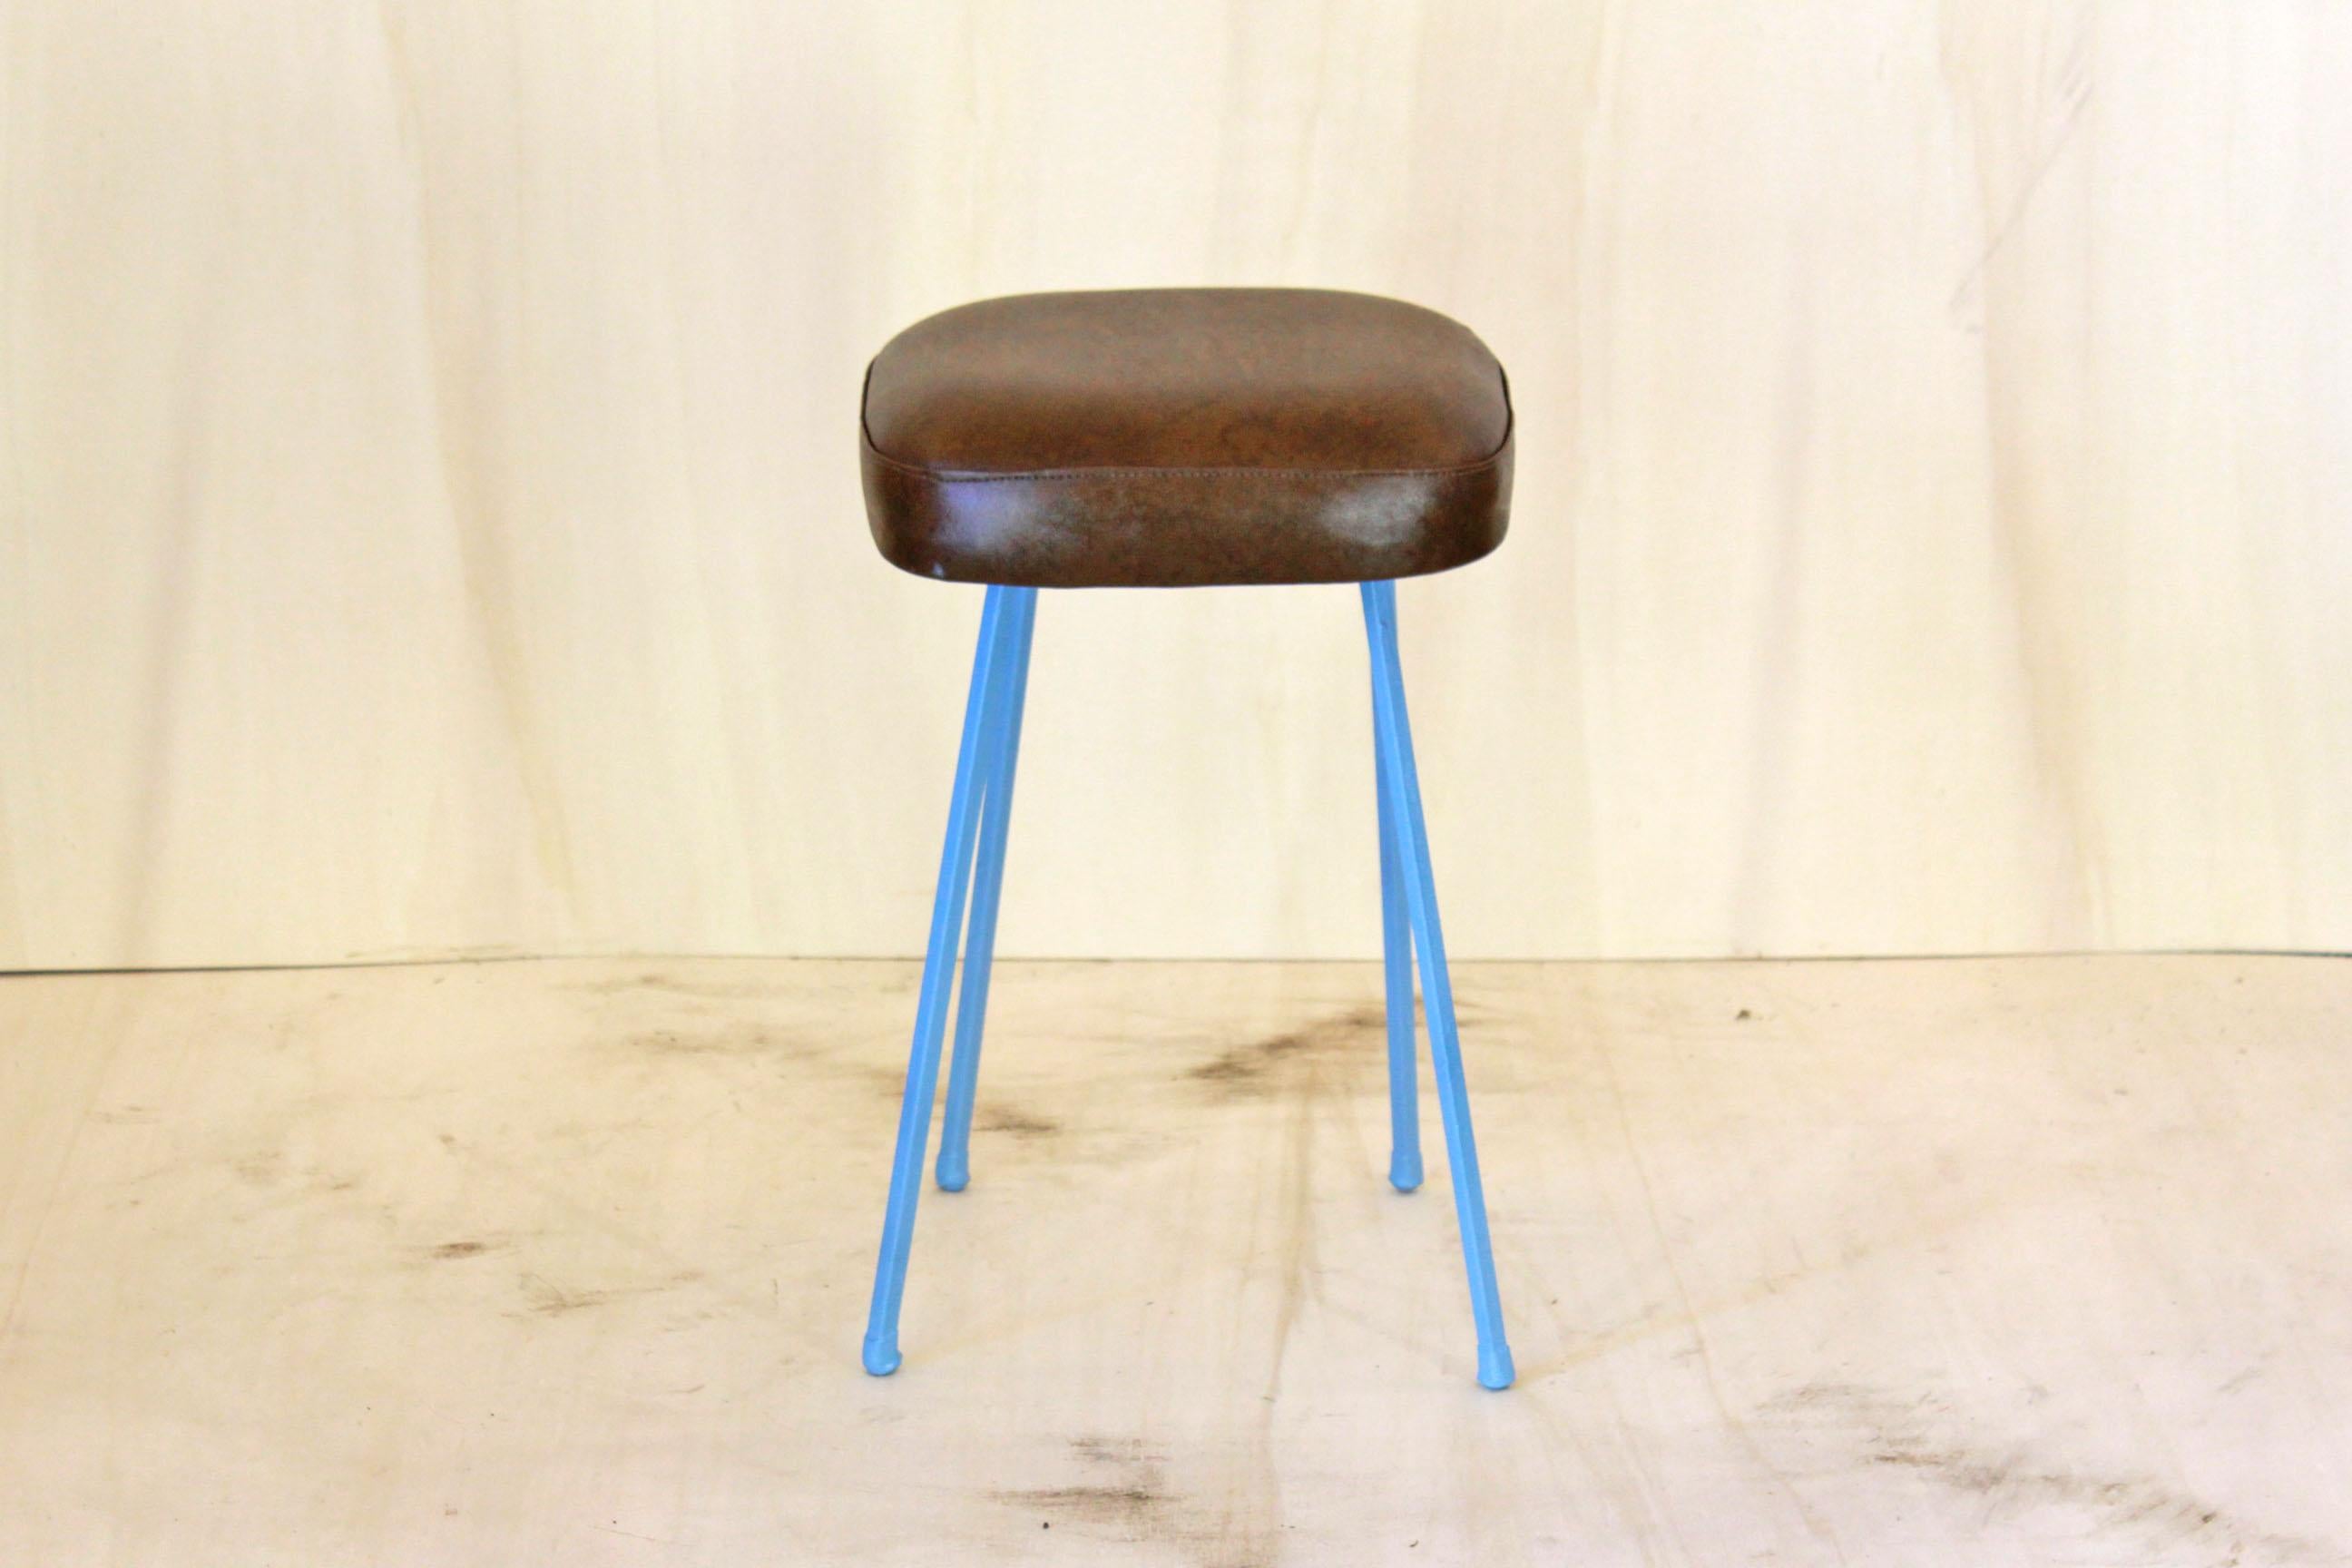 Vintage Stools, Set of Two, Italy 1960s
1960s Iron stools with skai cover. The structure has been repainted by taking original colour. The cover is still the original one. In excellent conditions with only few signs of time.